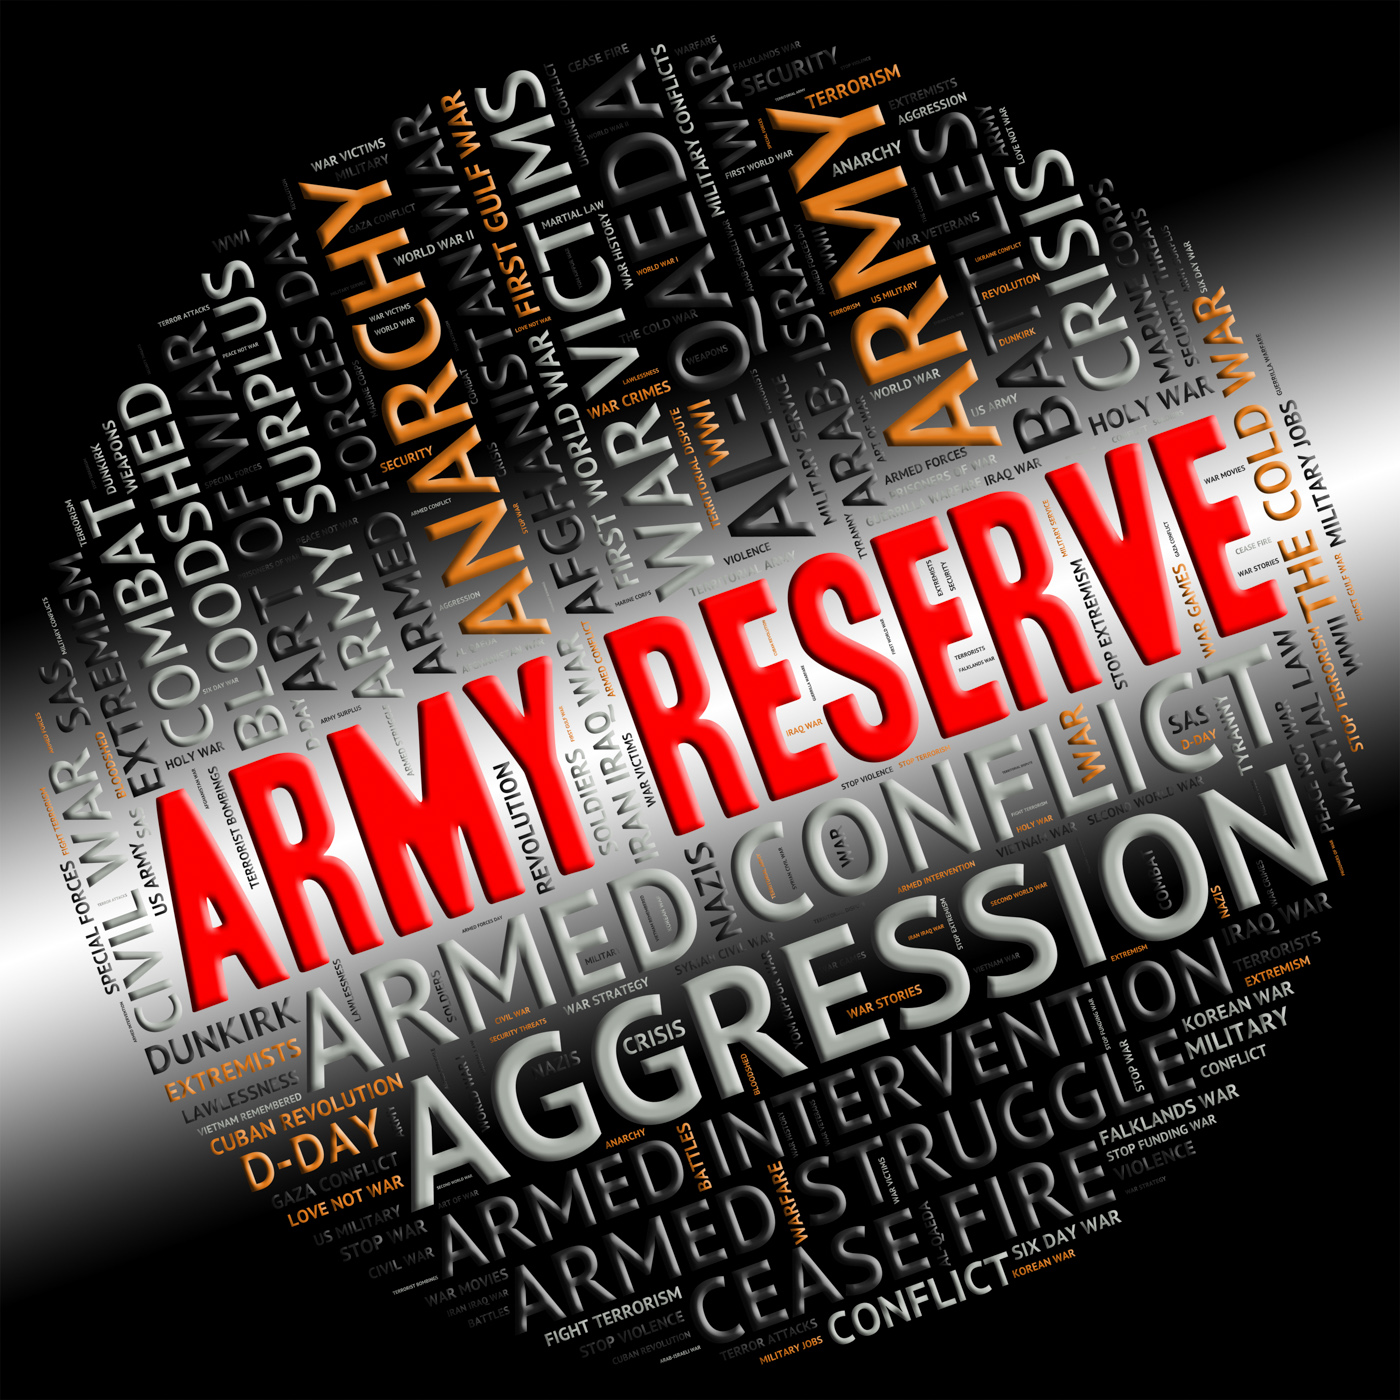 Army reserve means armed services and clashes photo